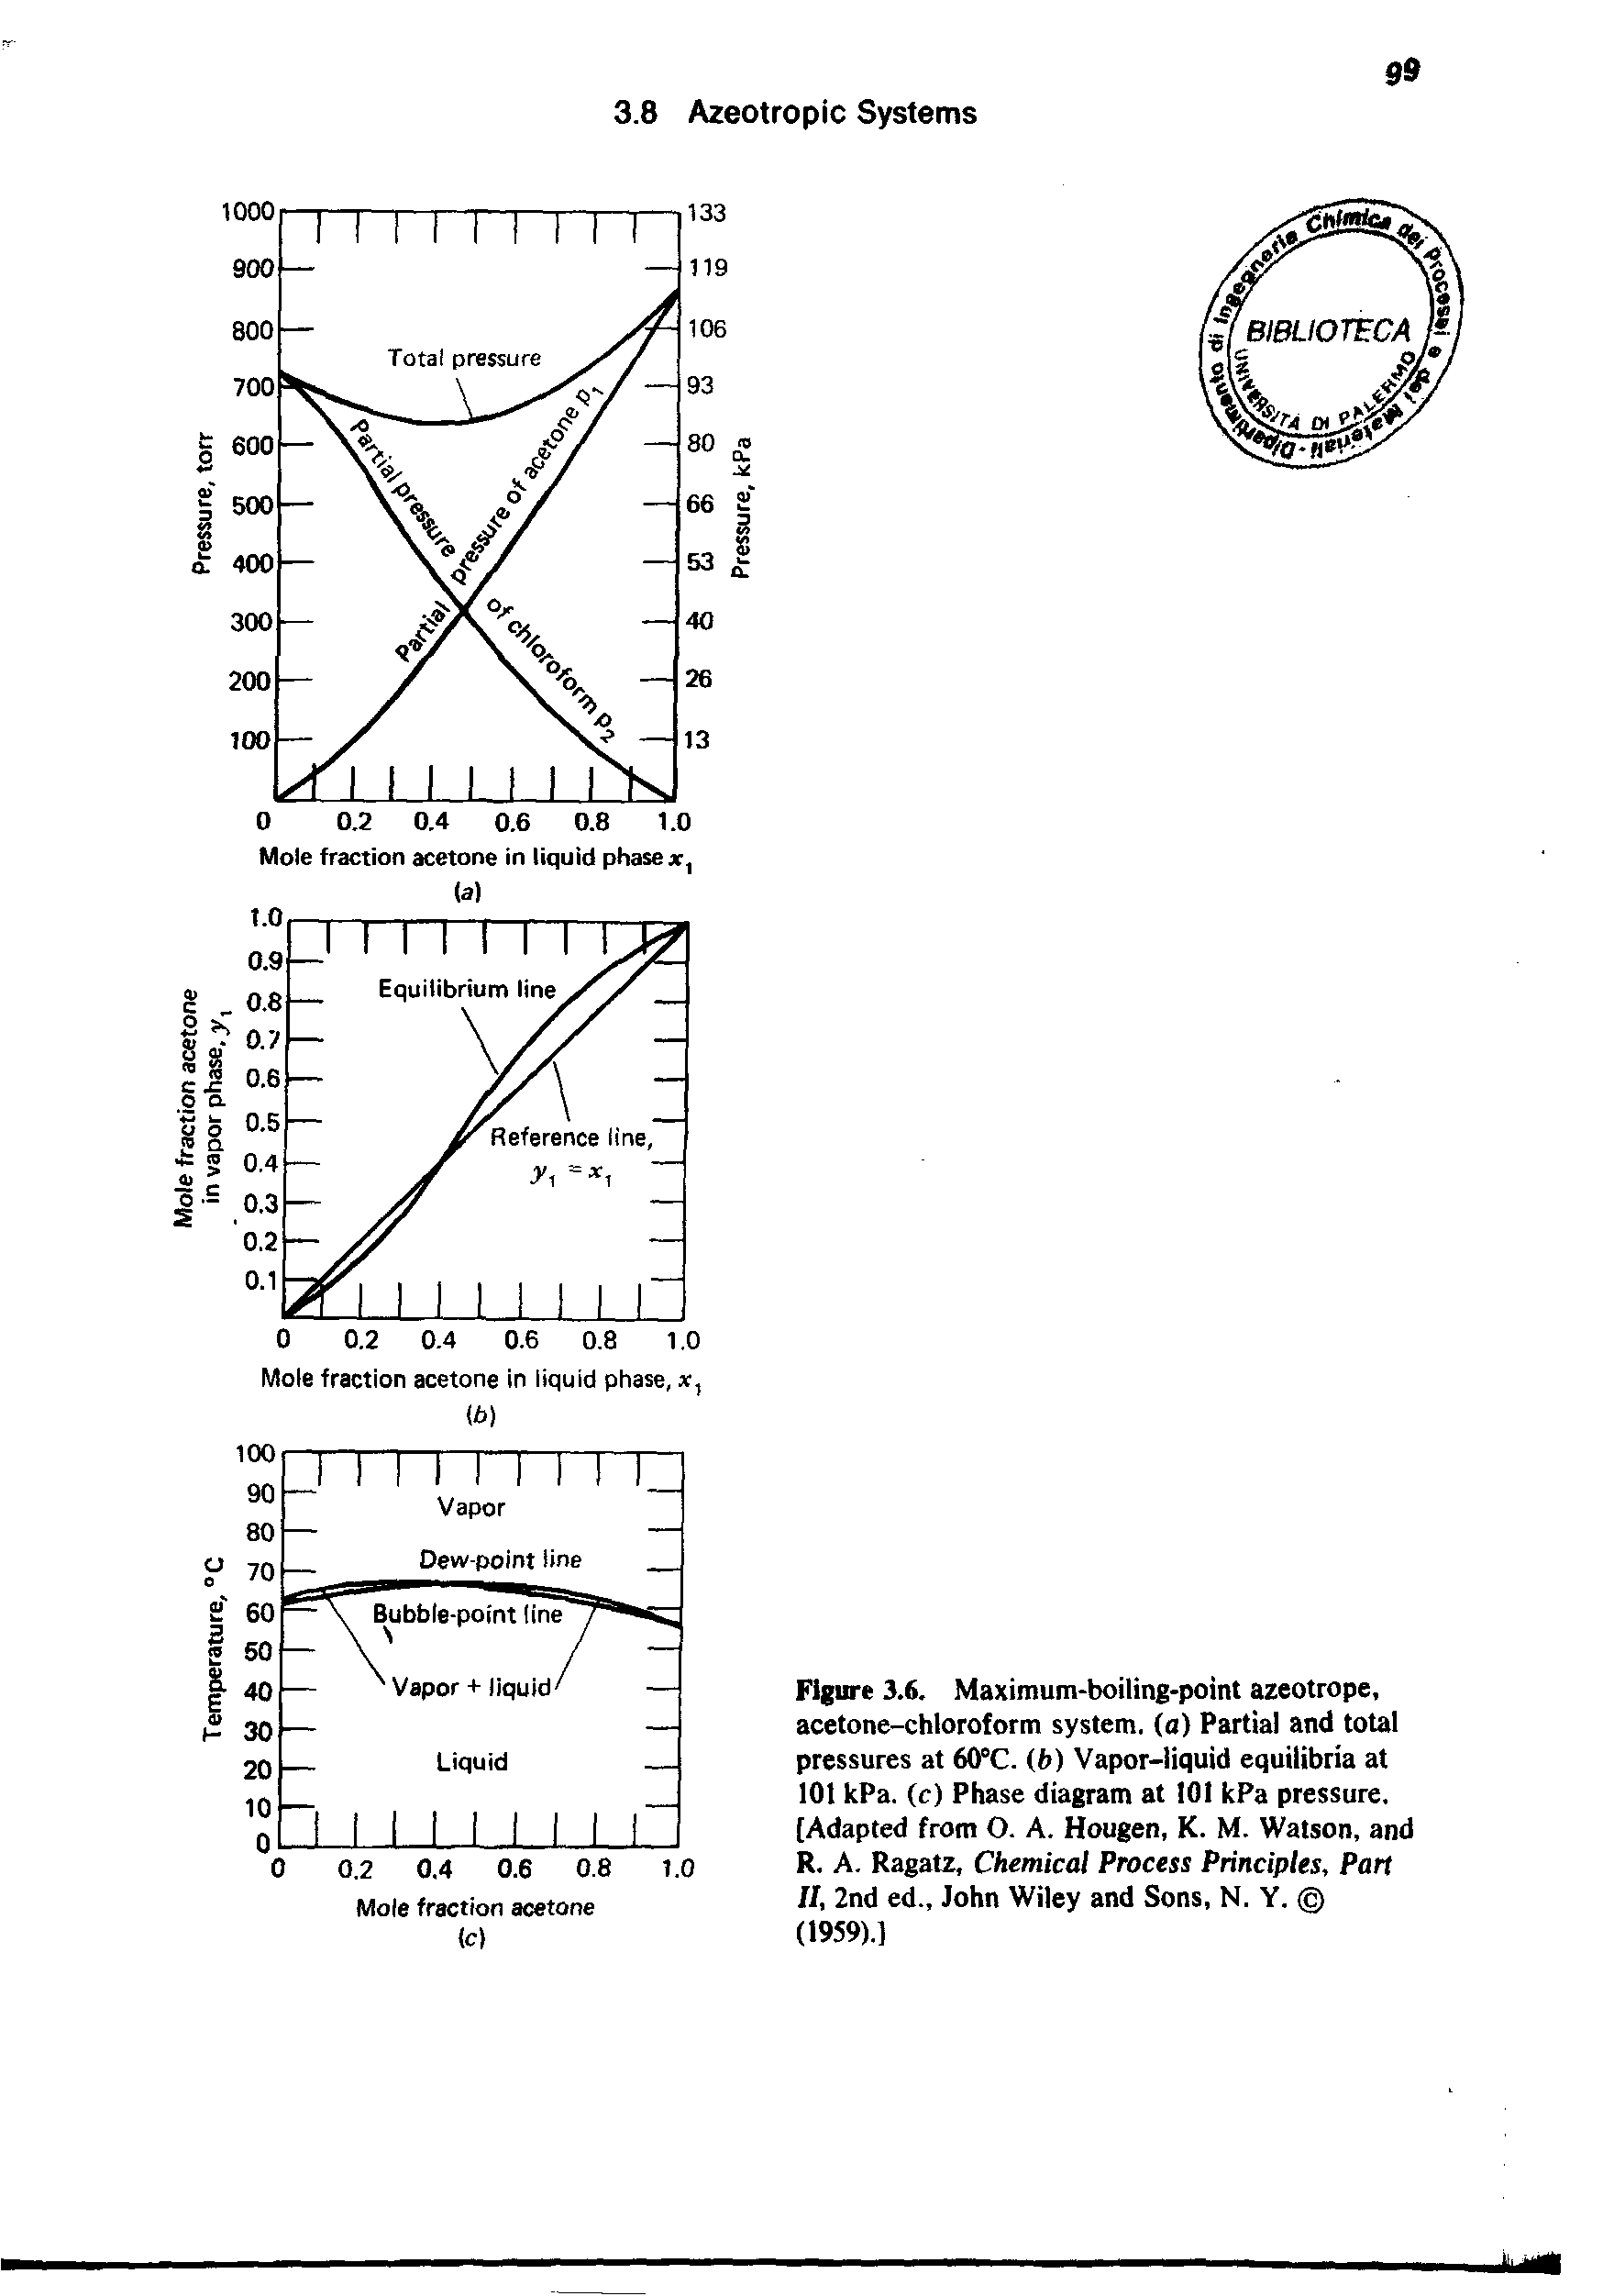 Figure 3.6. Maximum-boiling-point azeotrope, acetone-chloroform system, (a) Partial and total pressures at 60°C. (i>) Vapor-liquid equilibria at 101 kPa. (c) Phase diagram at 101 kPa pressure. [Adapted from O. A. Hougen, K. M. Watson, and R. A. Ragatz, Chemical Process Principles, Part //, 2nd ed., John Wiley and Sons, N. Y. ...